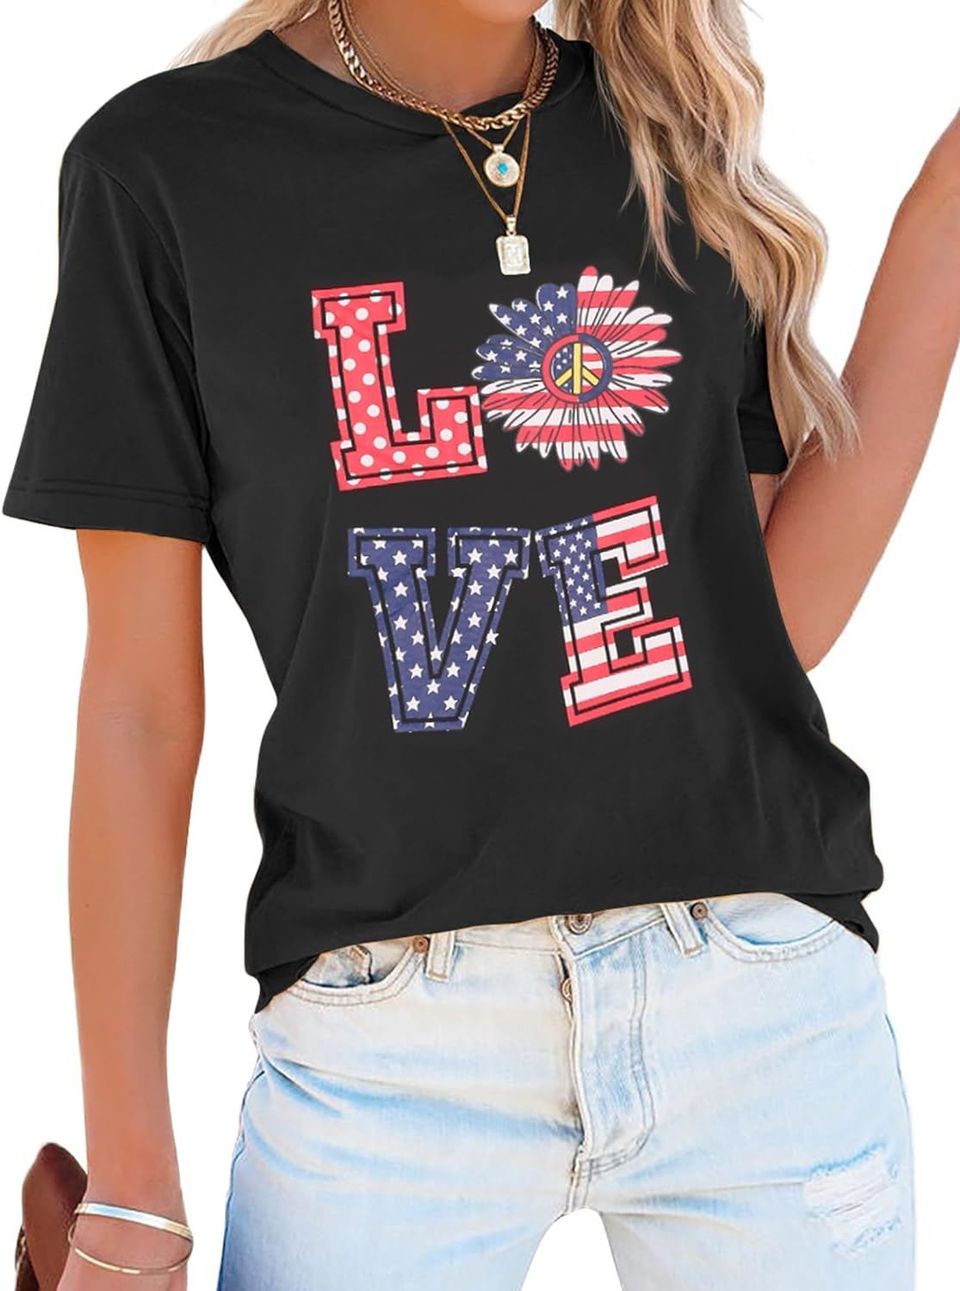 These cute patriotic Tees are 20% off with code: N6RRUH46 + a 10% clickable coupon at checkout! Under $11 at checkout!